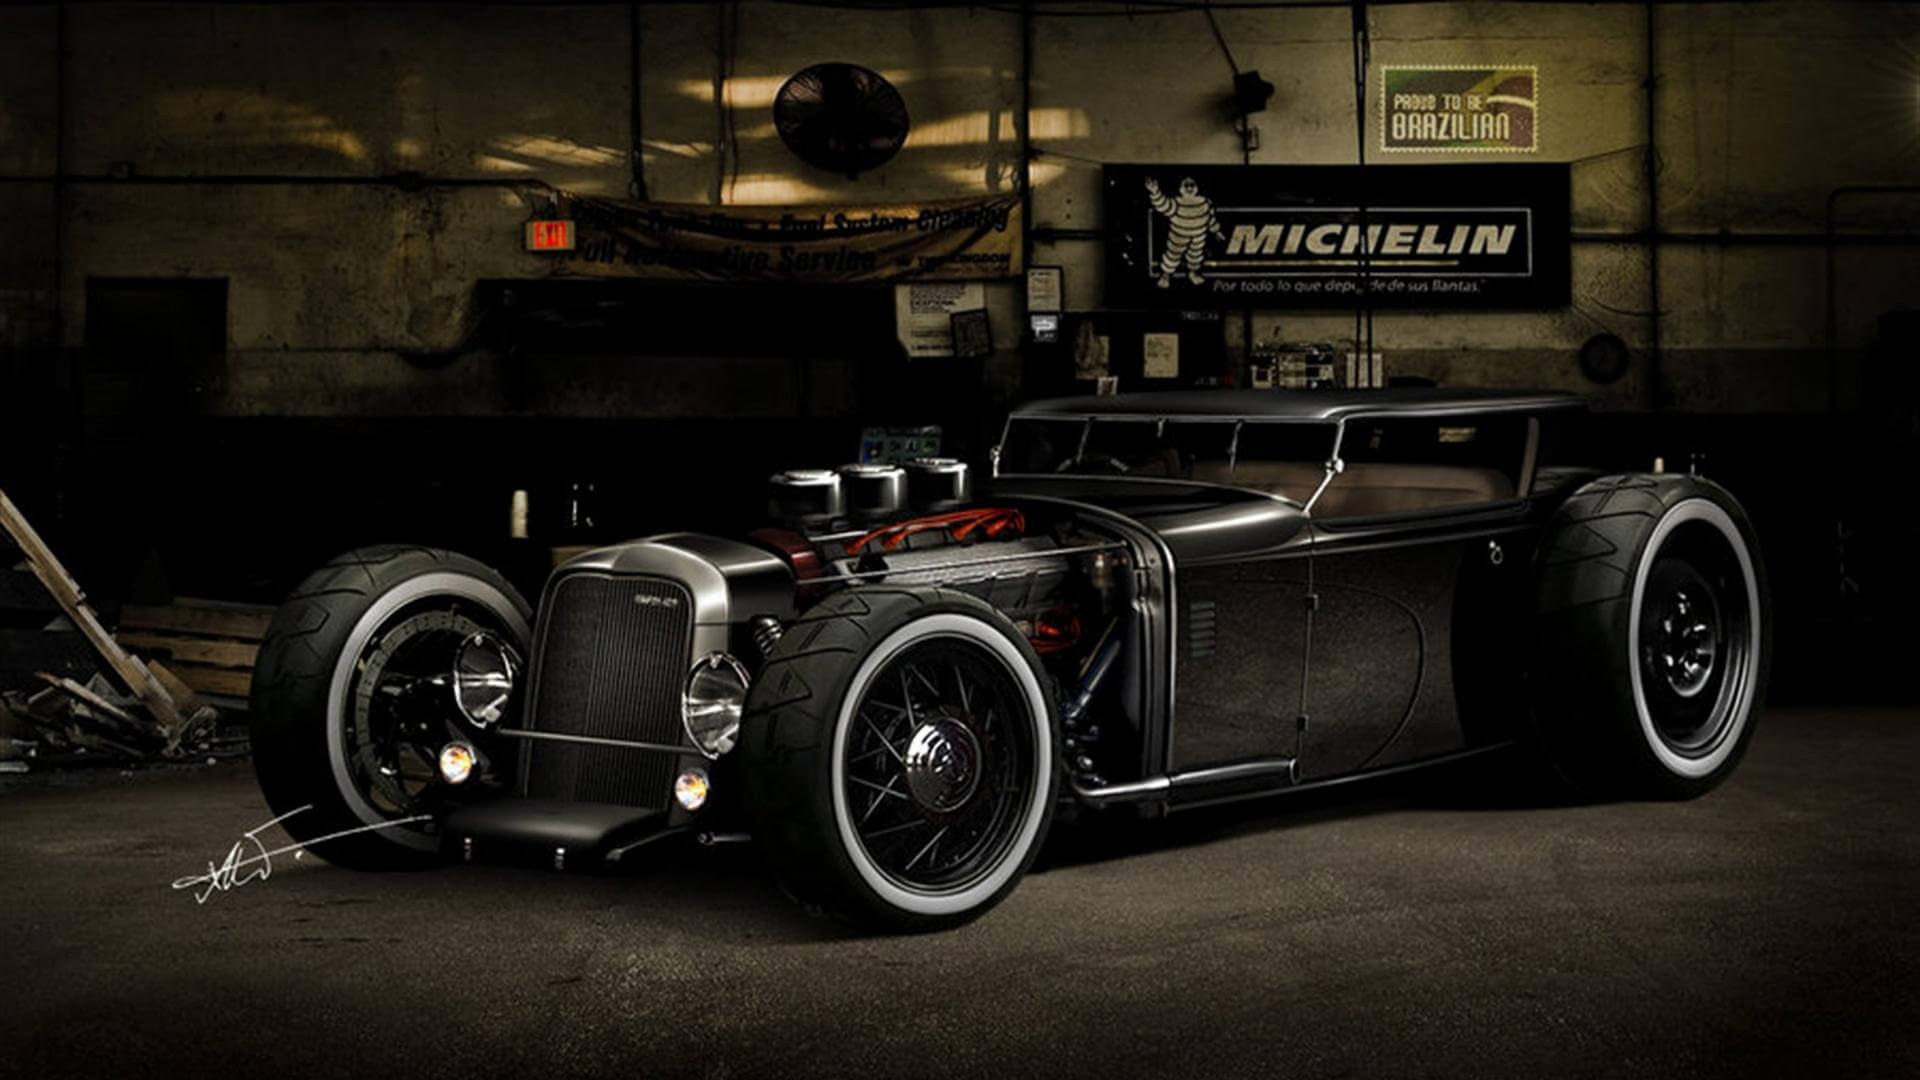 Old Model Cars Hd Wallpapers